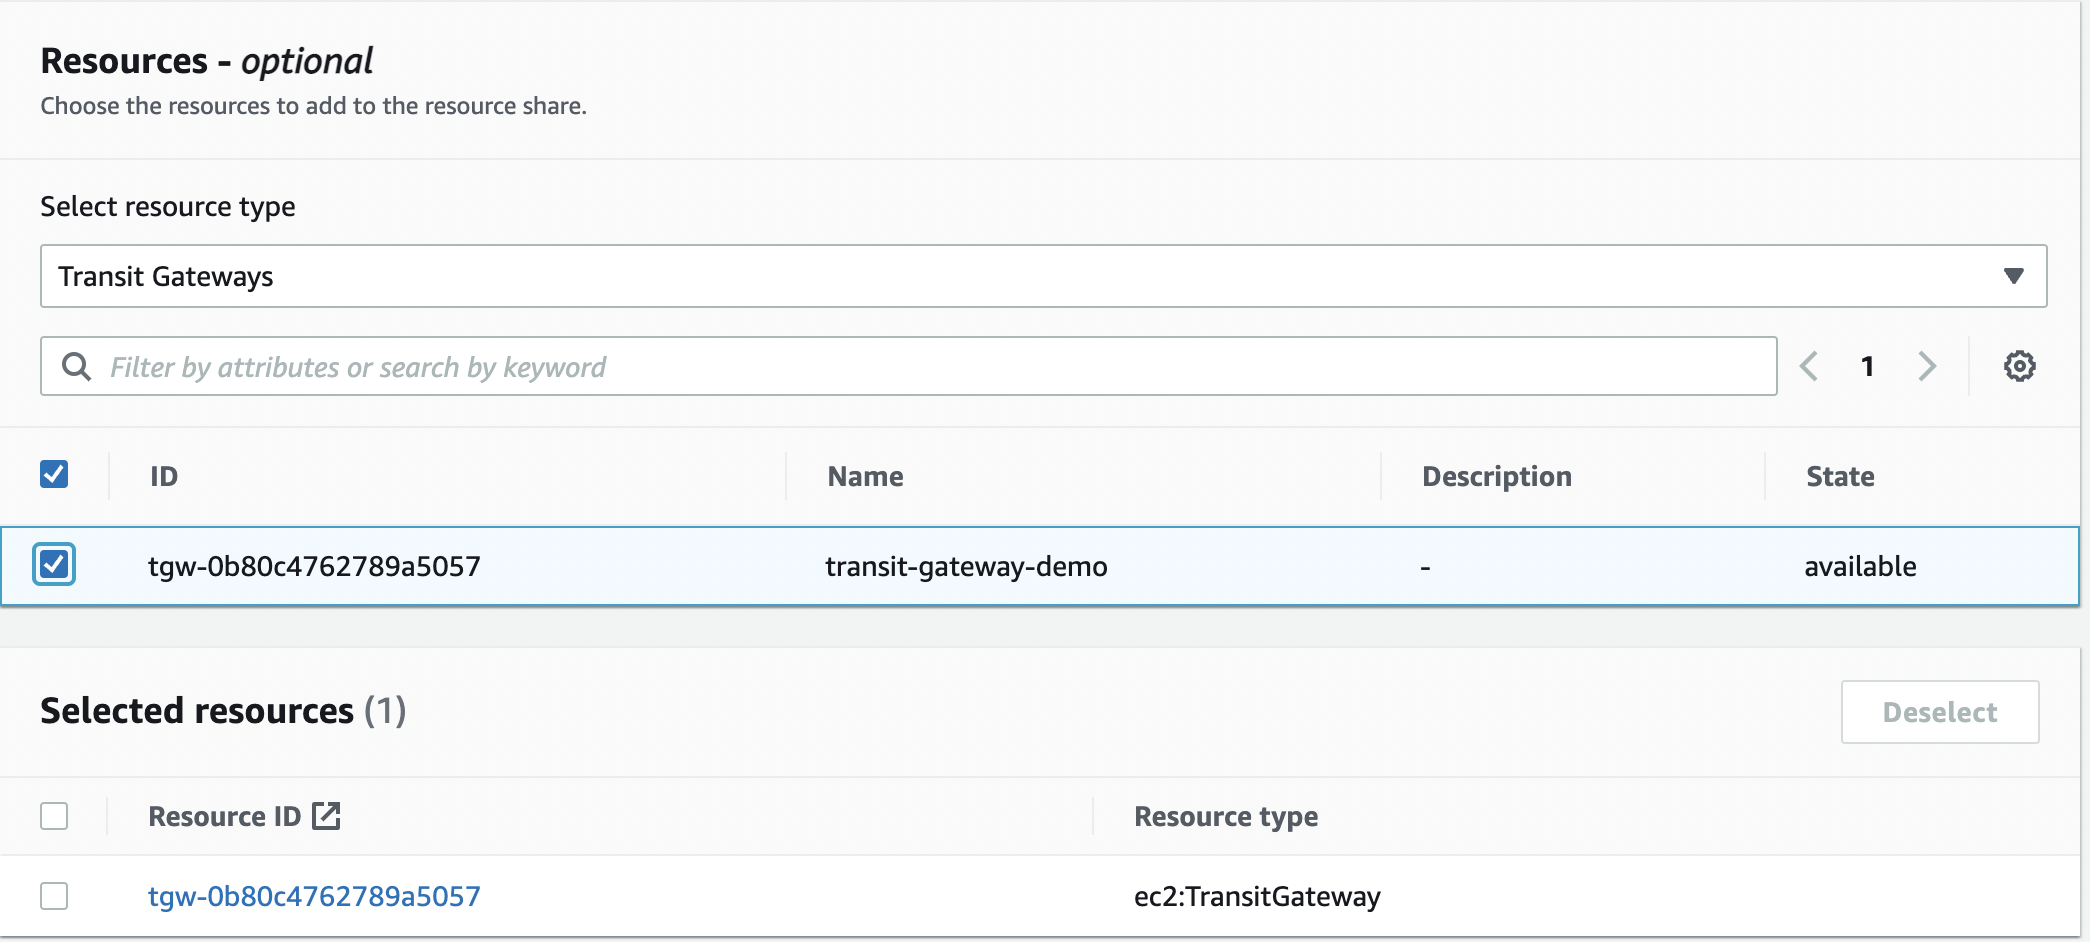  Resource -> Select the resource type as "Transit Gateways" and select the transit gateway that we created in step 1.